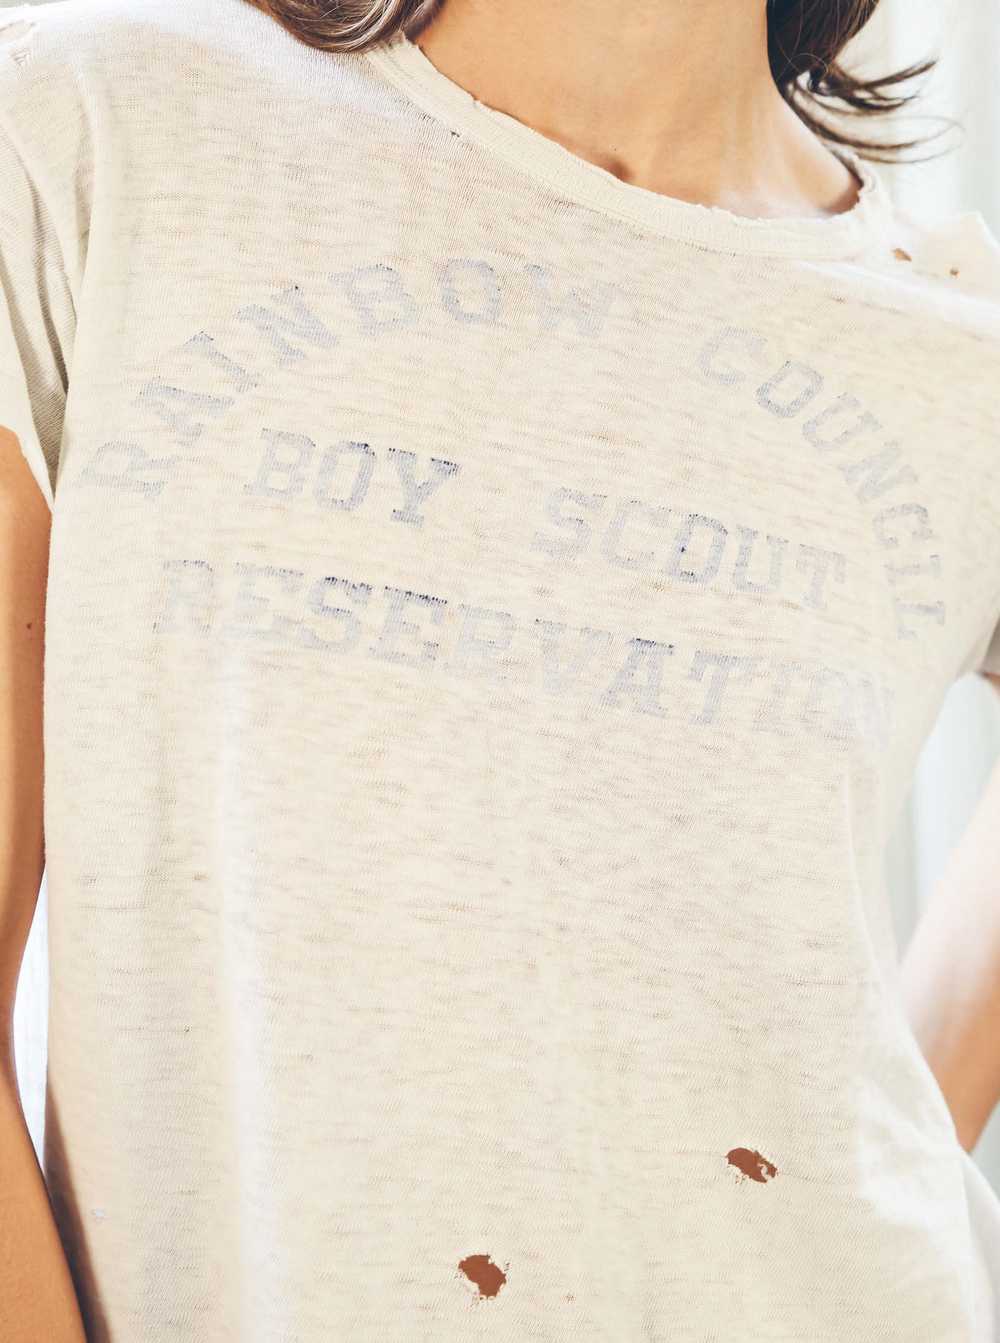 Distressed Boy Scout Reservation Tee - image 2